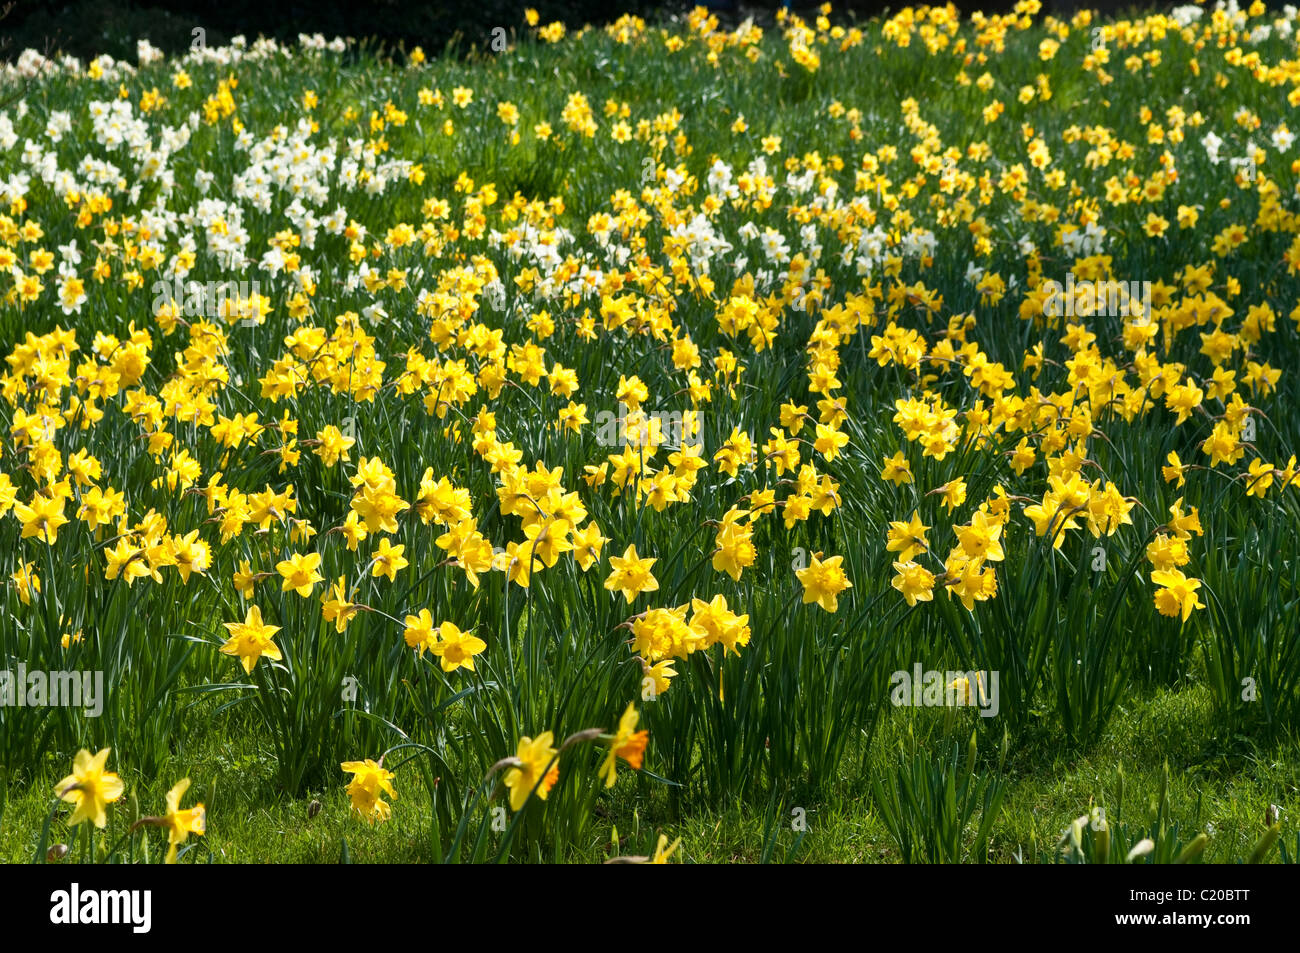 Daffodils in bloom in early spring, Hampton Court Palace grounds, Surrey England, UK Stock Photo